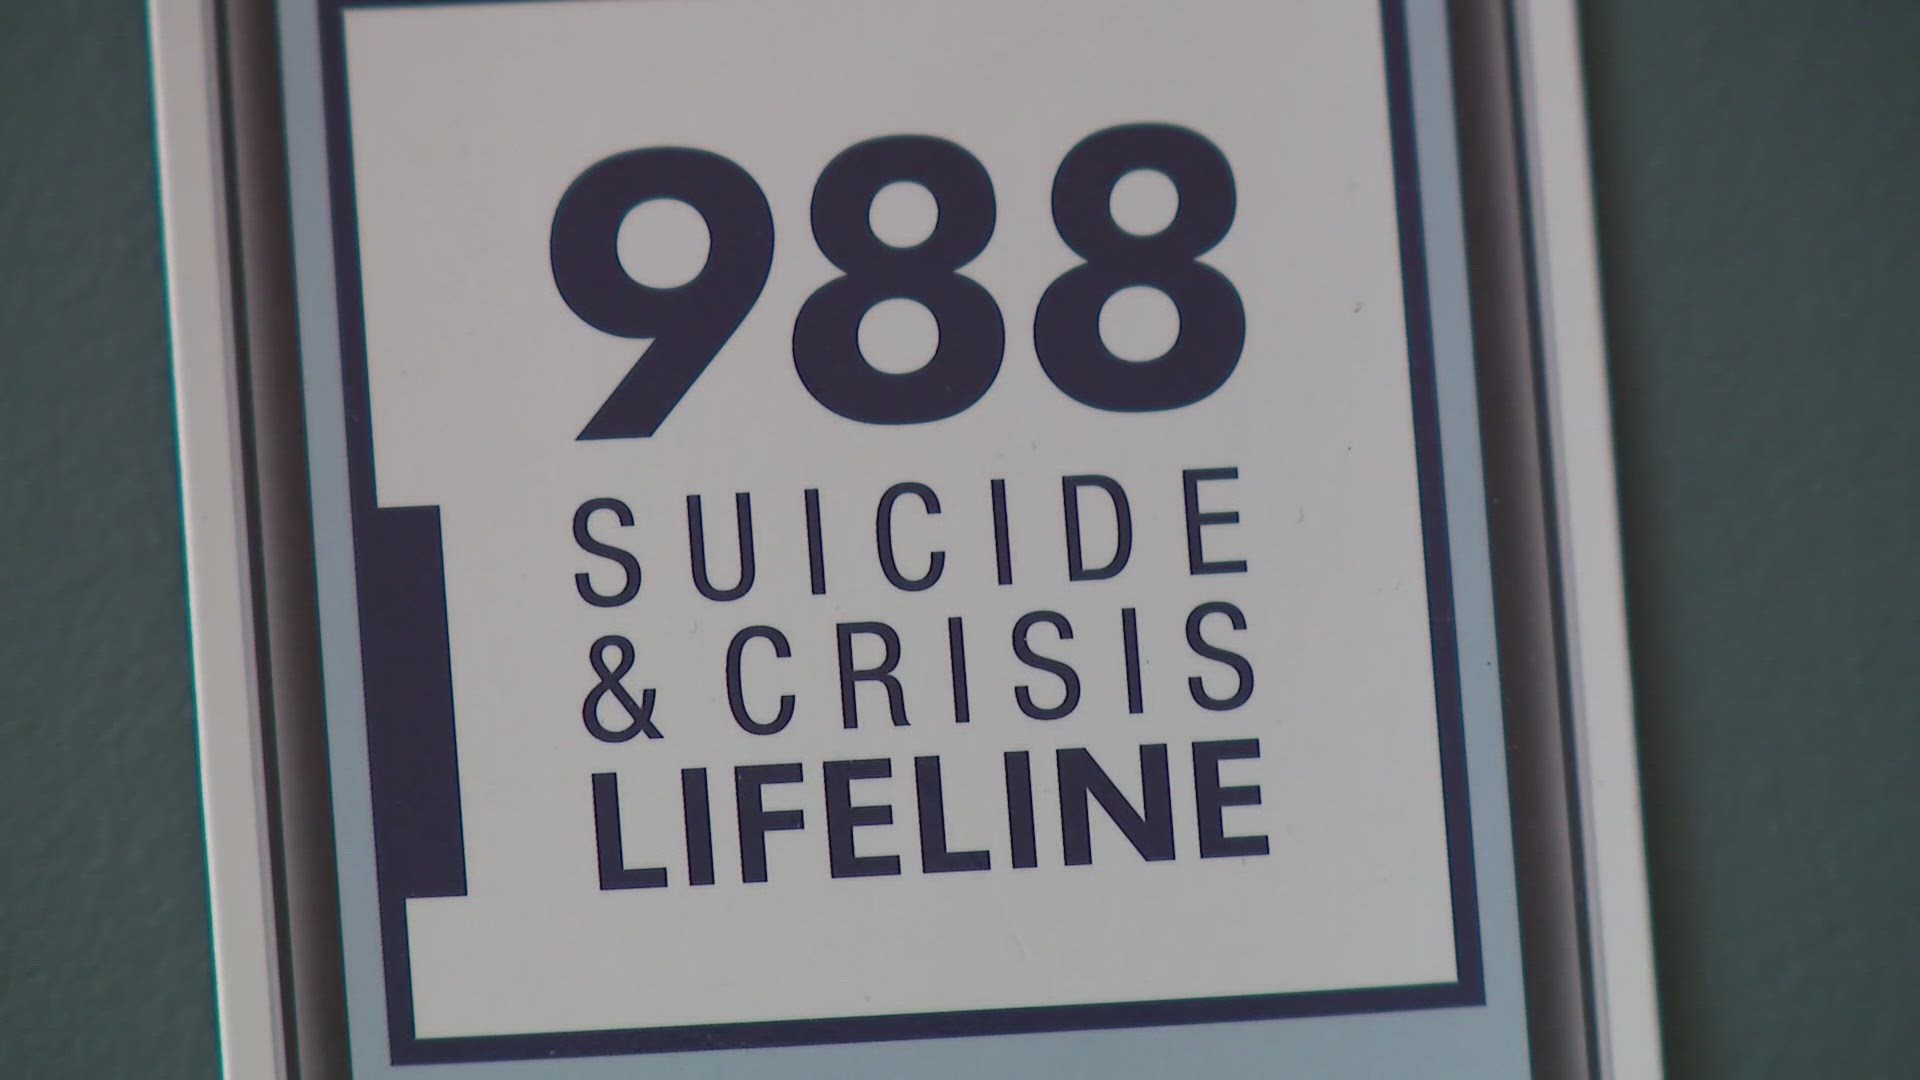 Approximately five people die by suicide every day in Ohio. The state recently released a new prevention plan to reduce that number in the coming years.